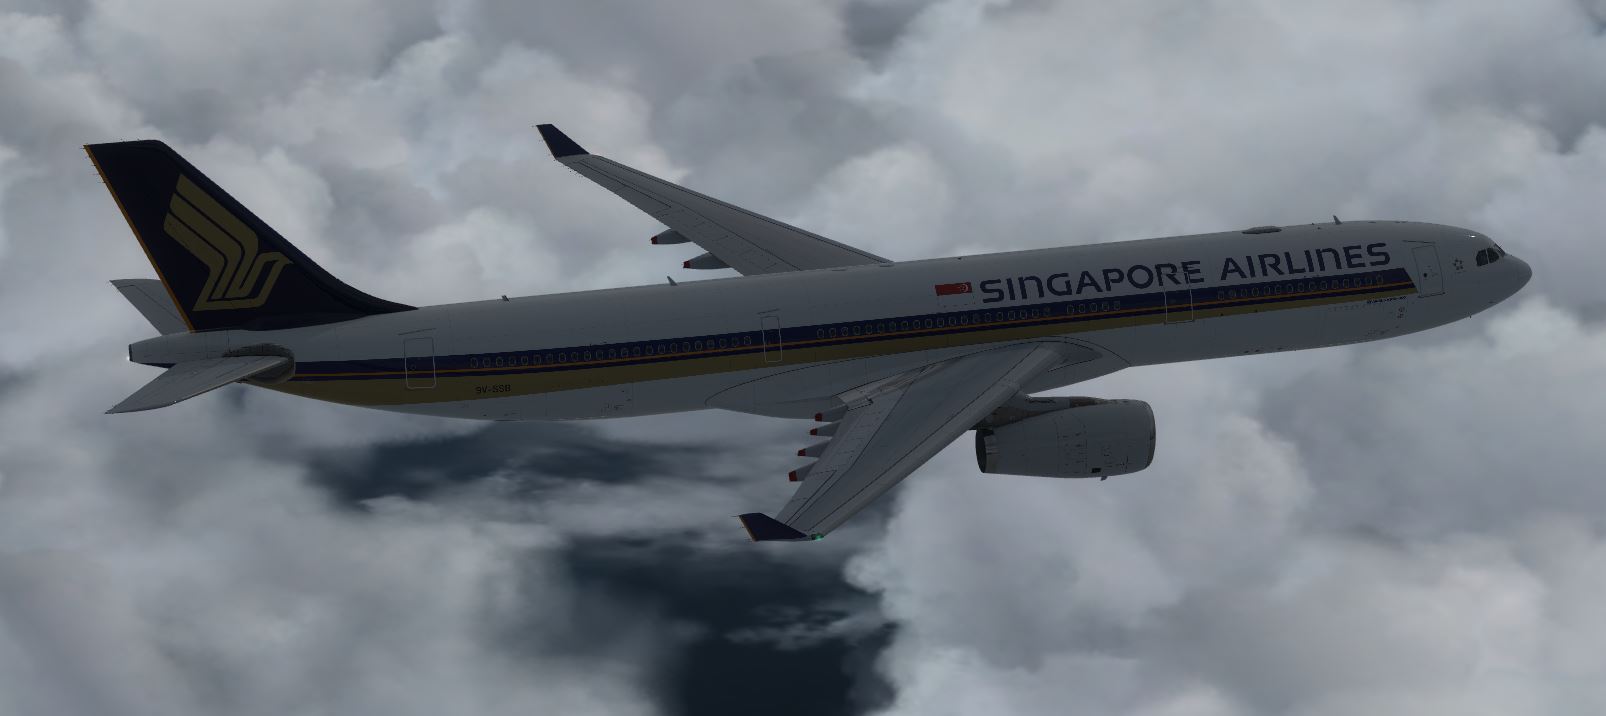 AS A330 Singapore Airlines-2342 